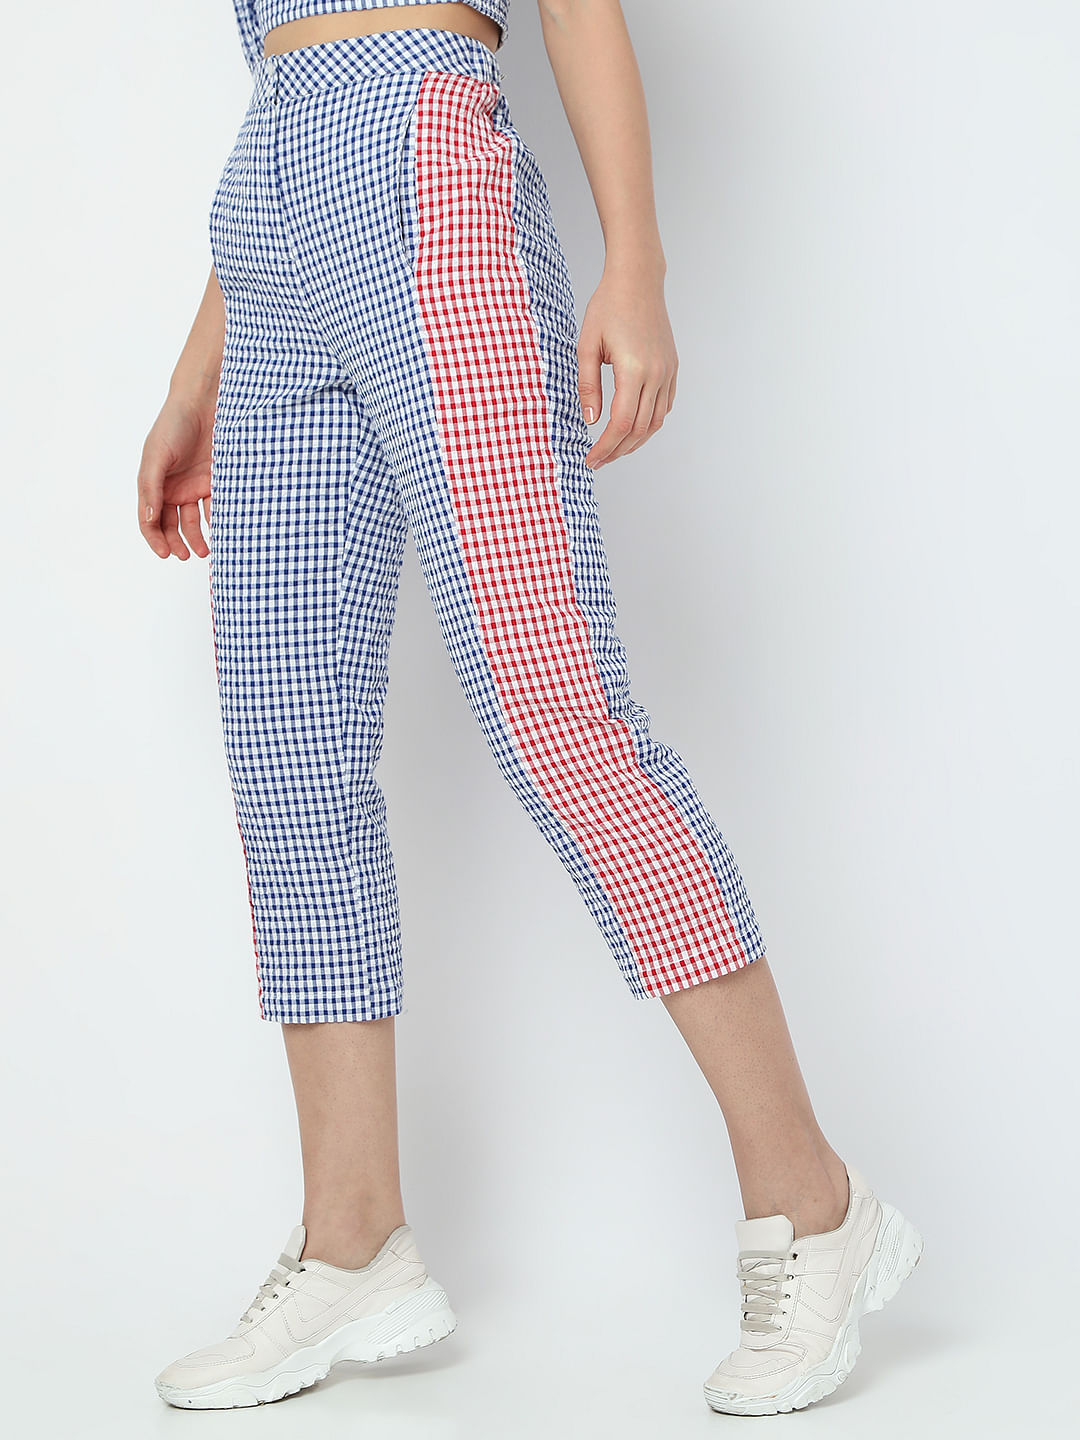 Fabnest Bottoms Pants and Trousers  Buy Fabnest Handloom Cotton Pink And White  Check Pants Online  Nykaa Fashion